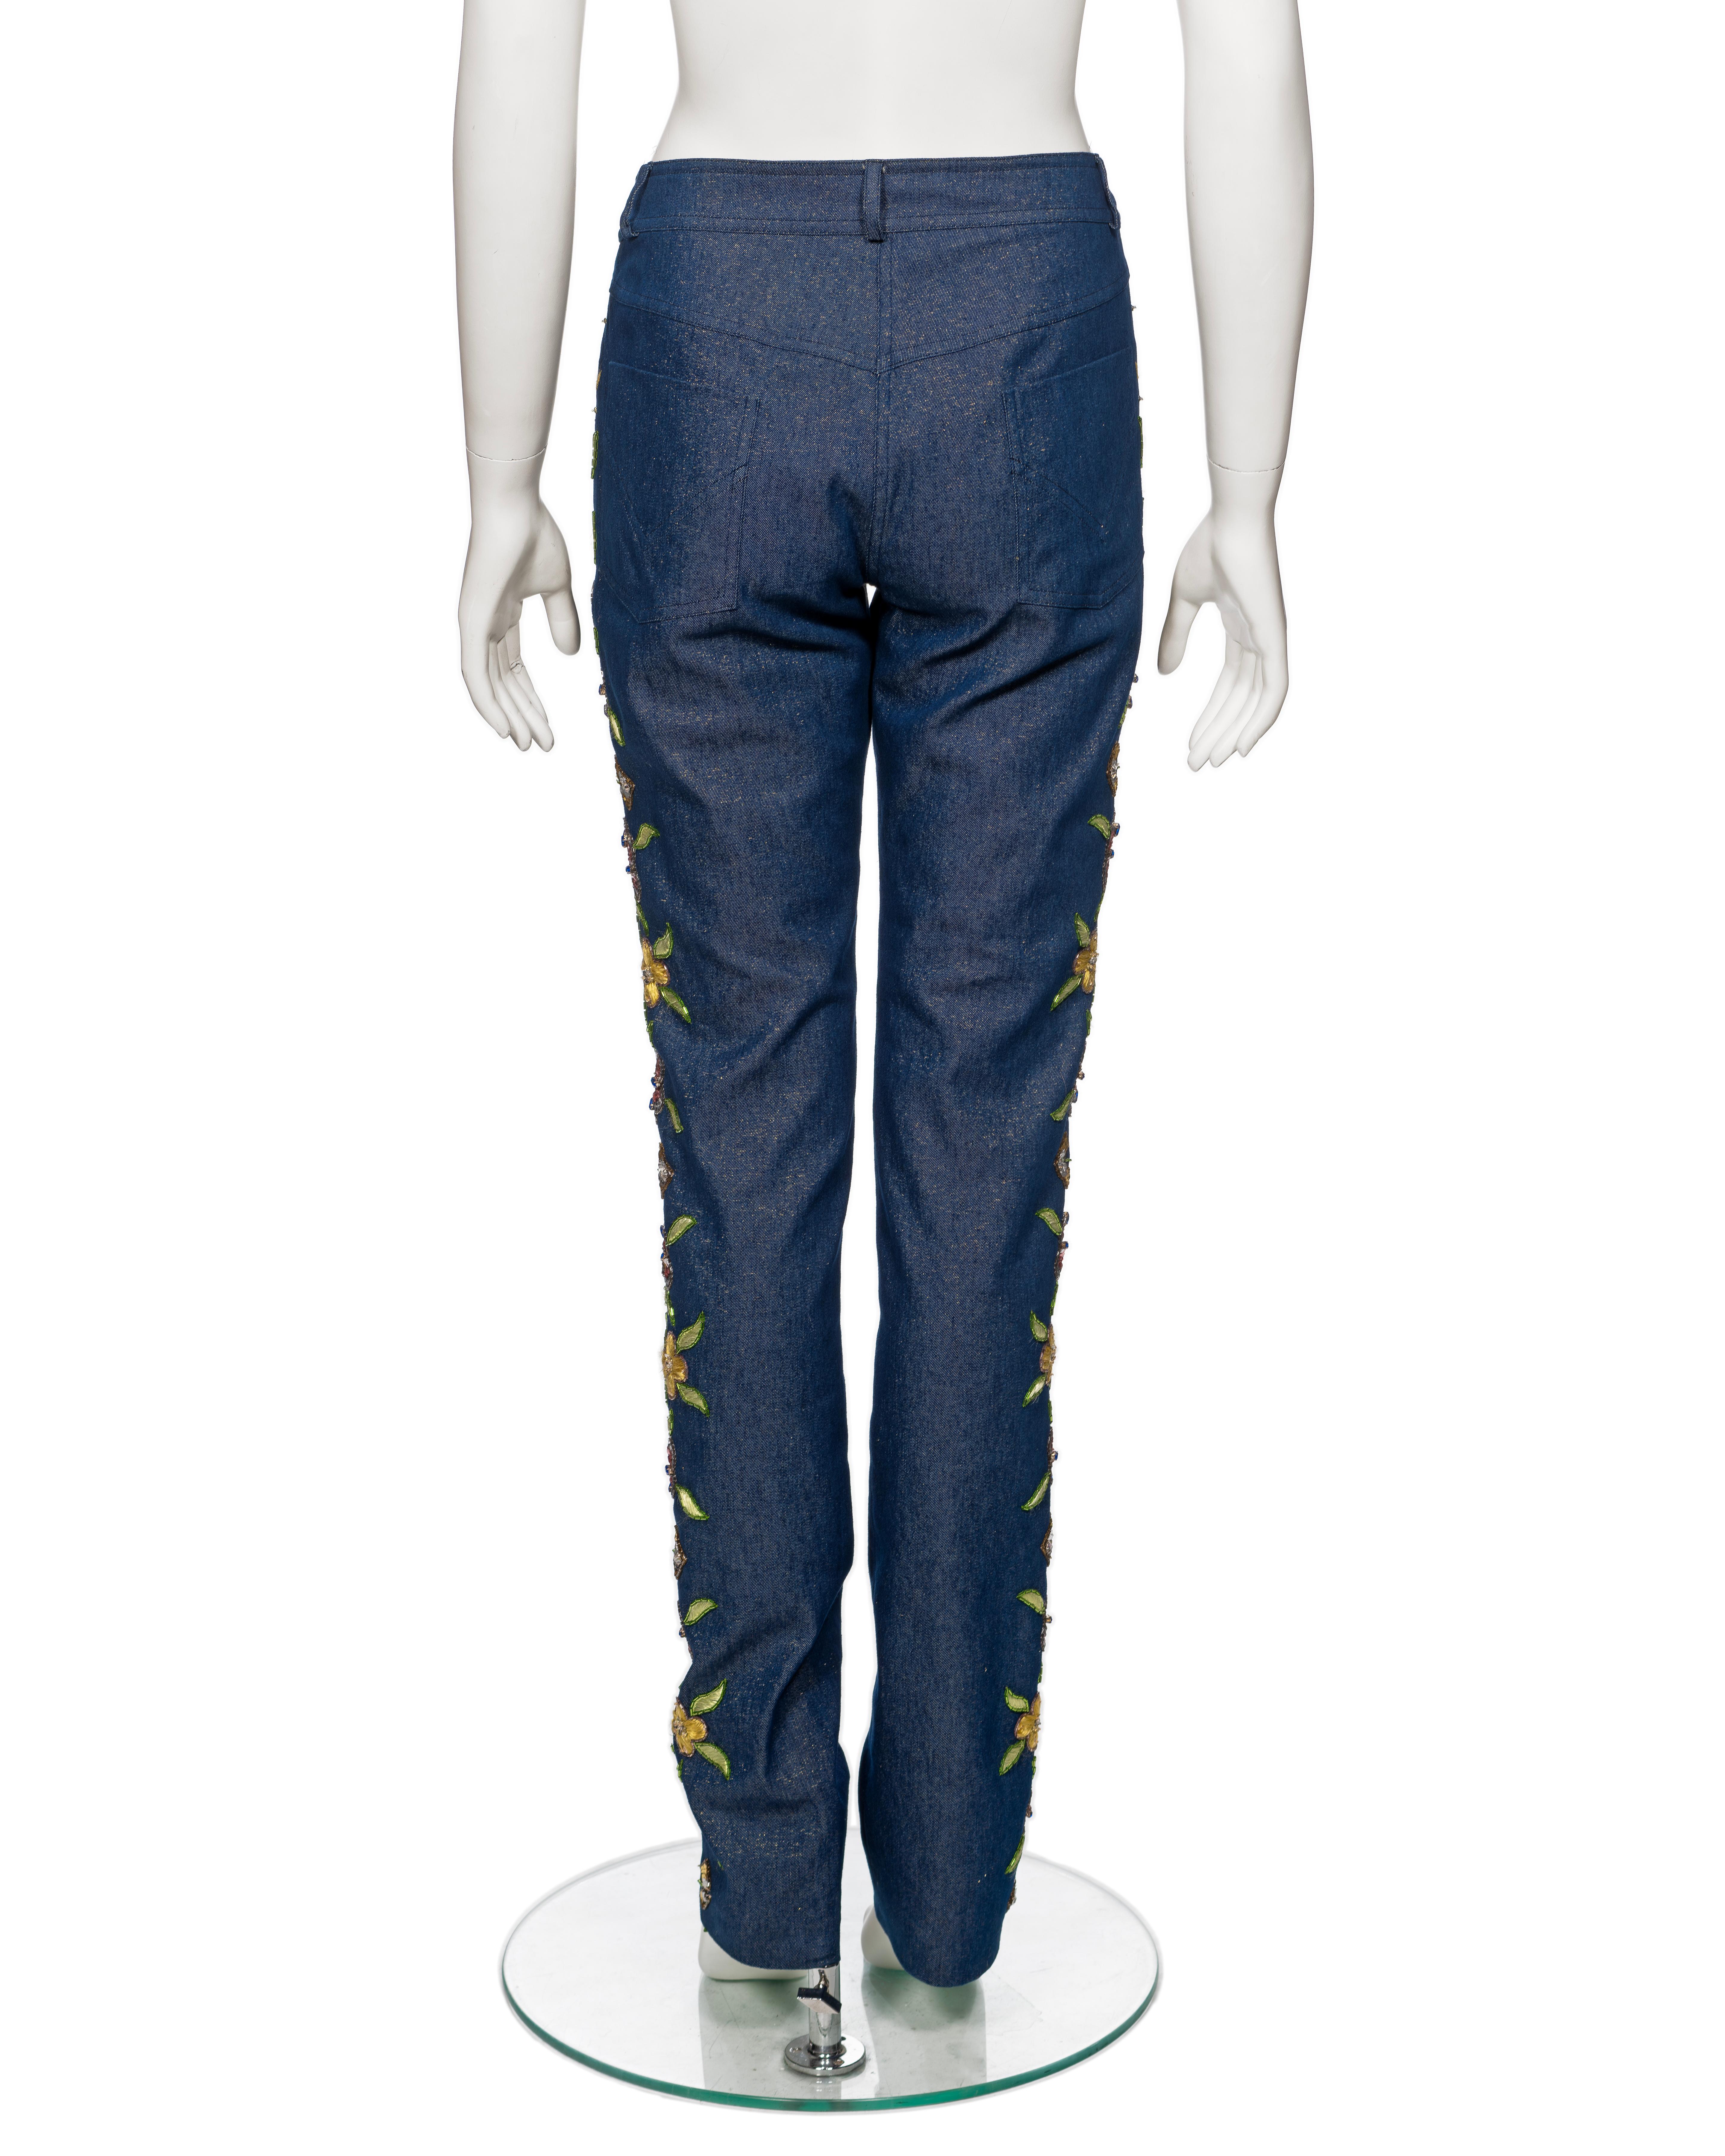 Christian Dior by John Galliano Lurex Denim Embellished Skinny Jeans, SS 2002 For Sale 3